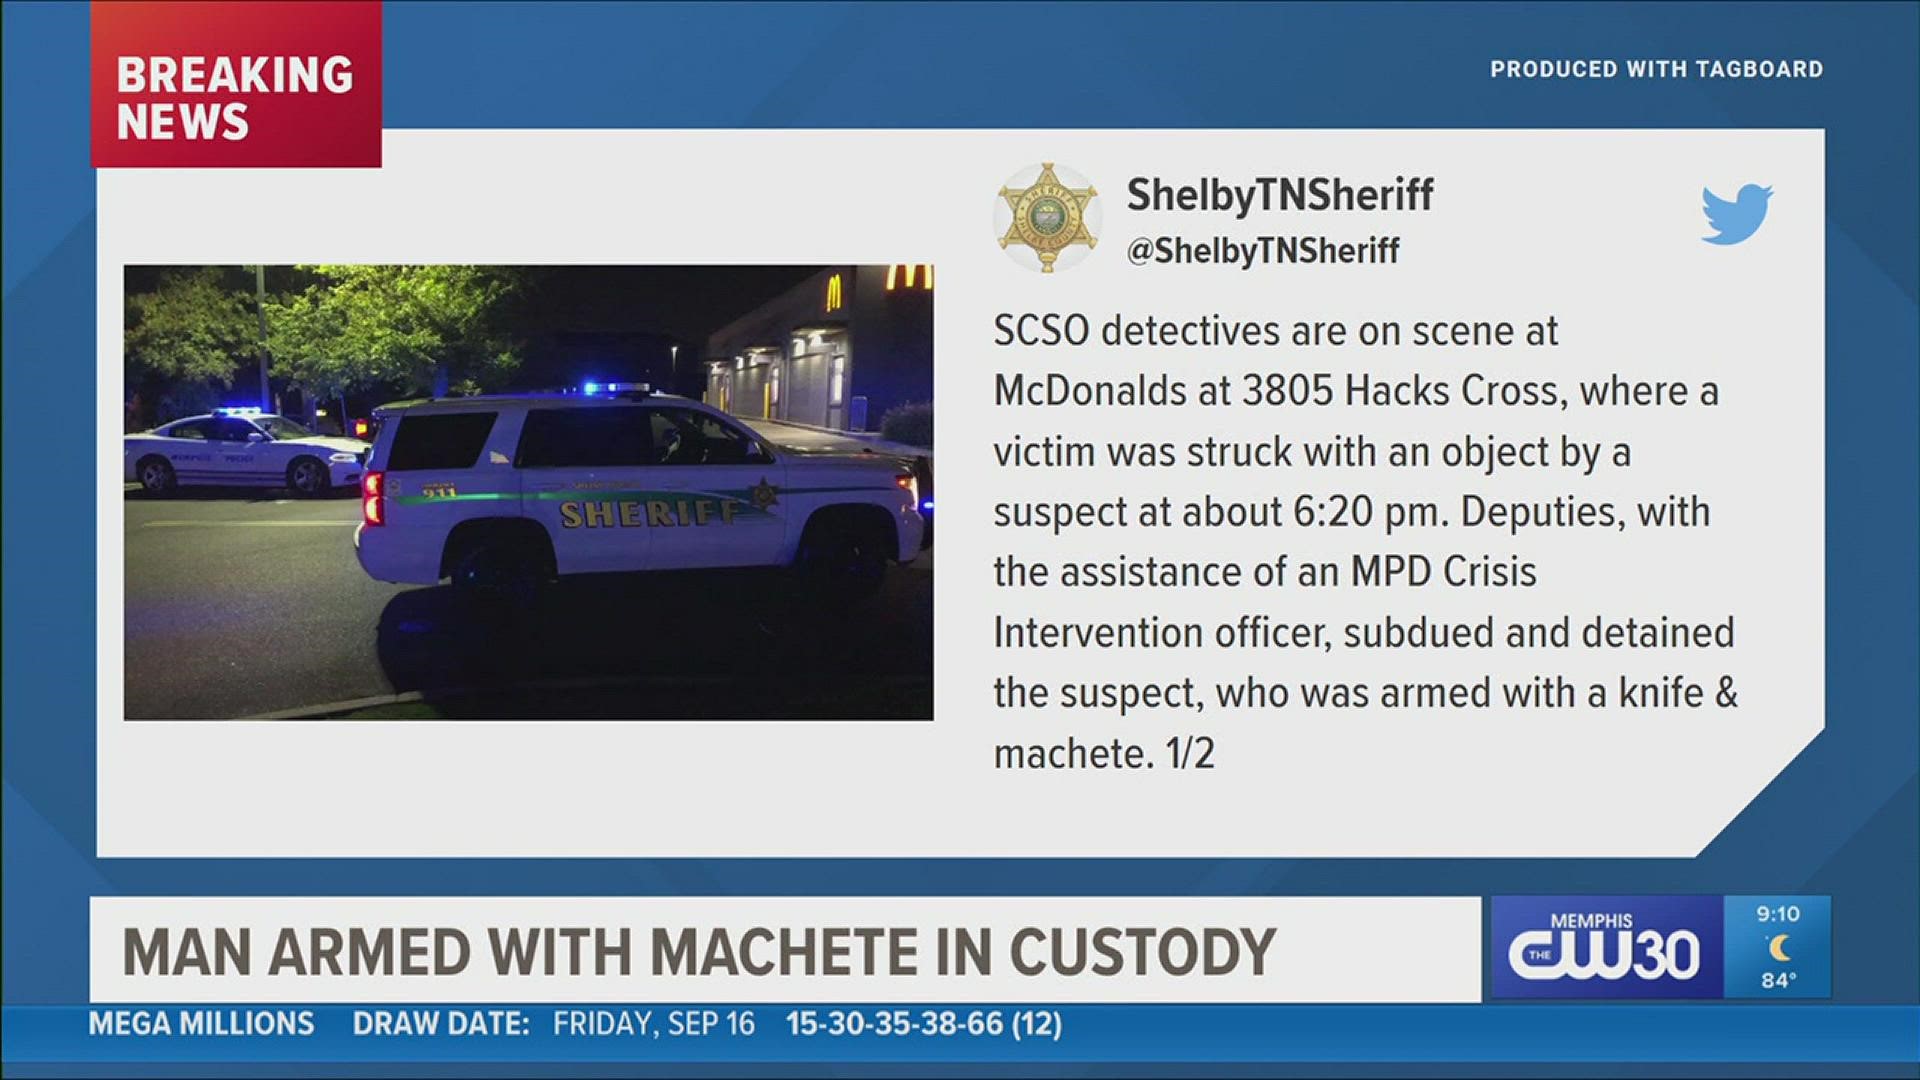 Shelby County deputies, with the help of Memphis police, subdued and detained the suspect.